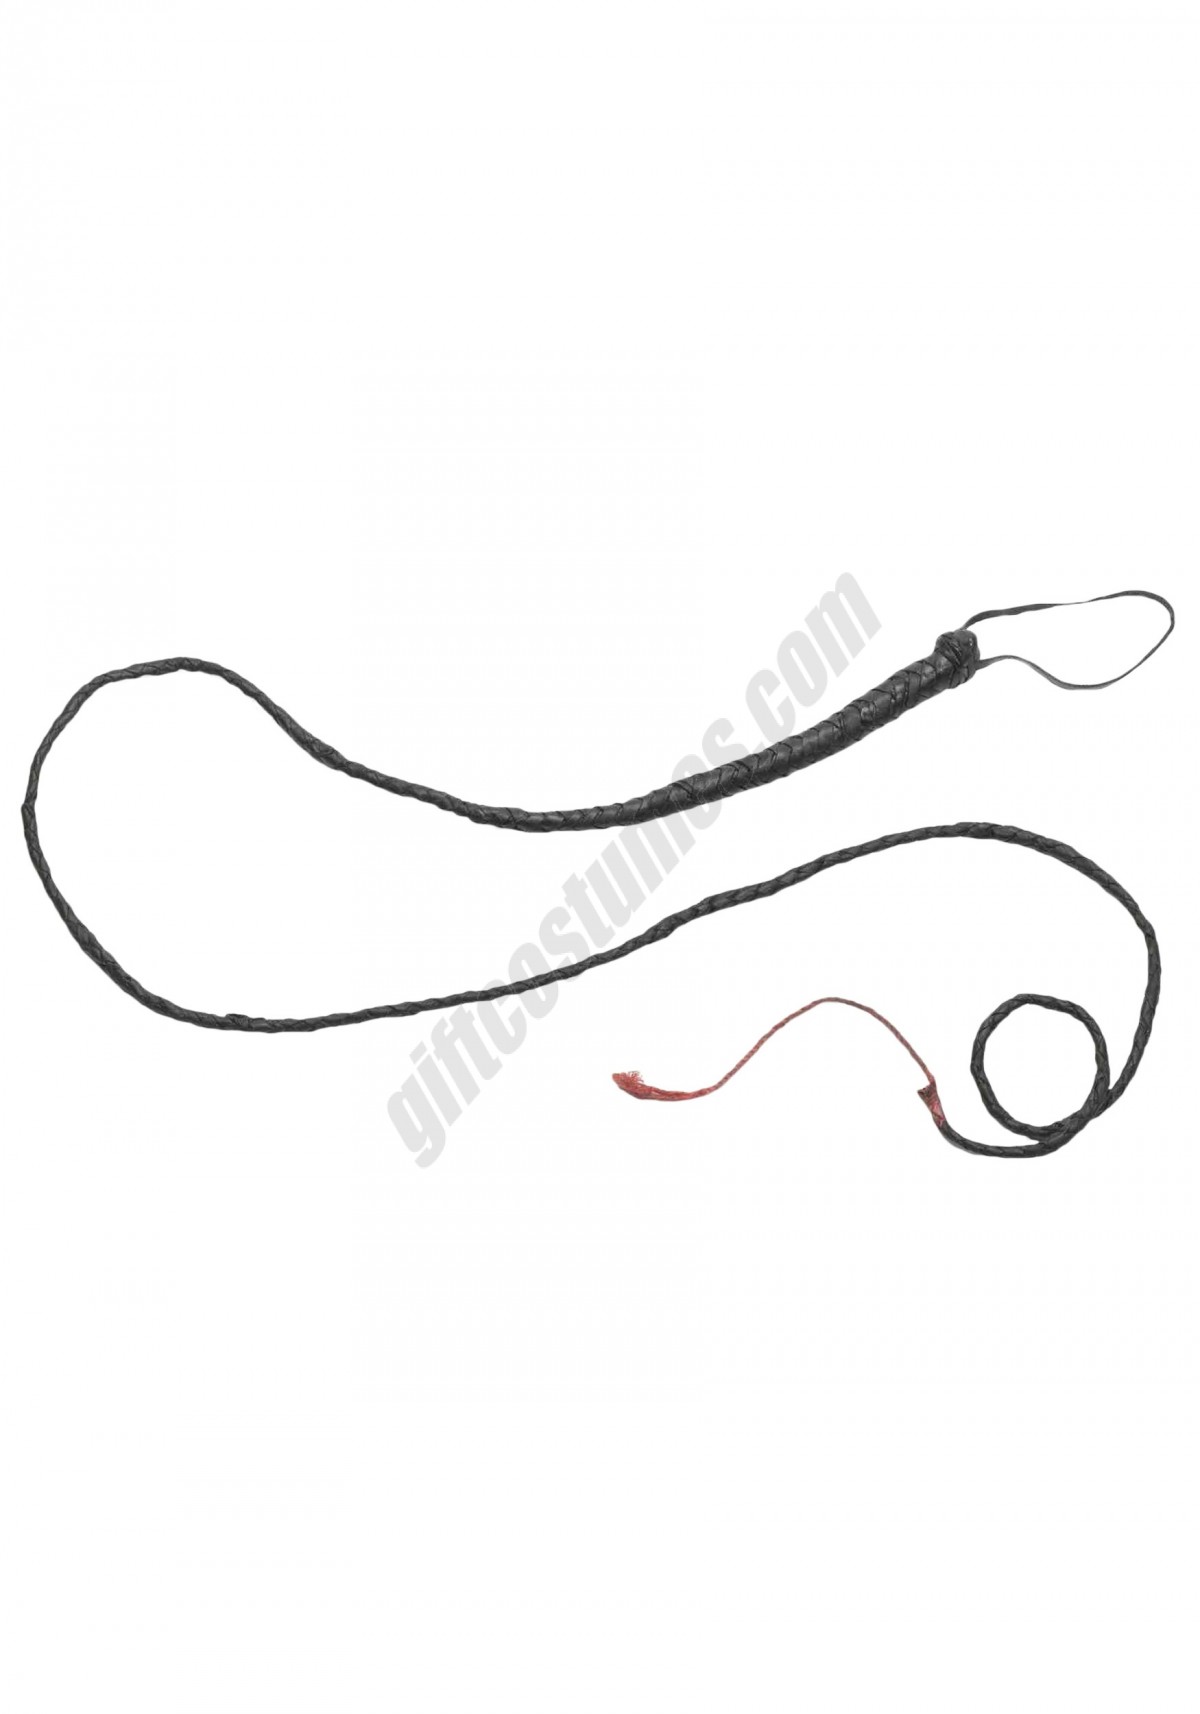 Zorro Black Deluxe Whip Promotions - -0